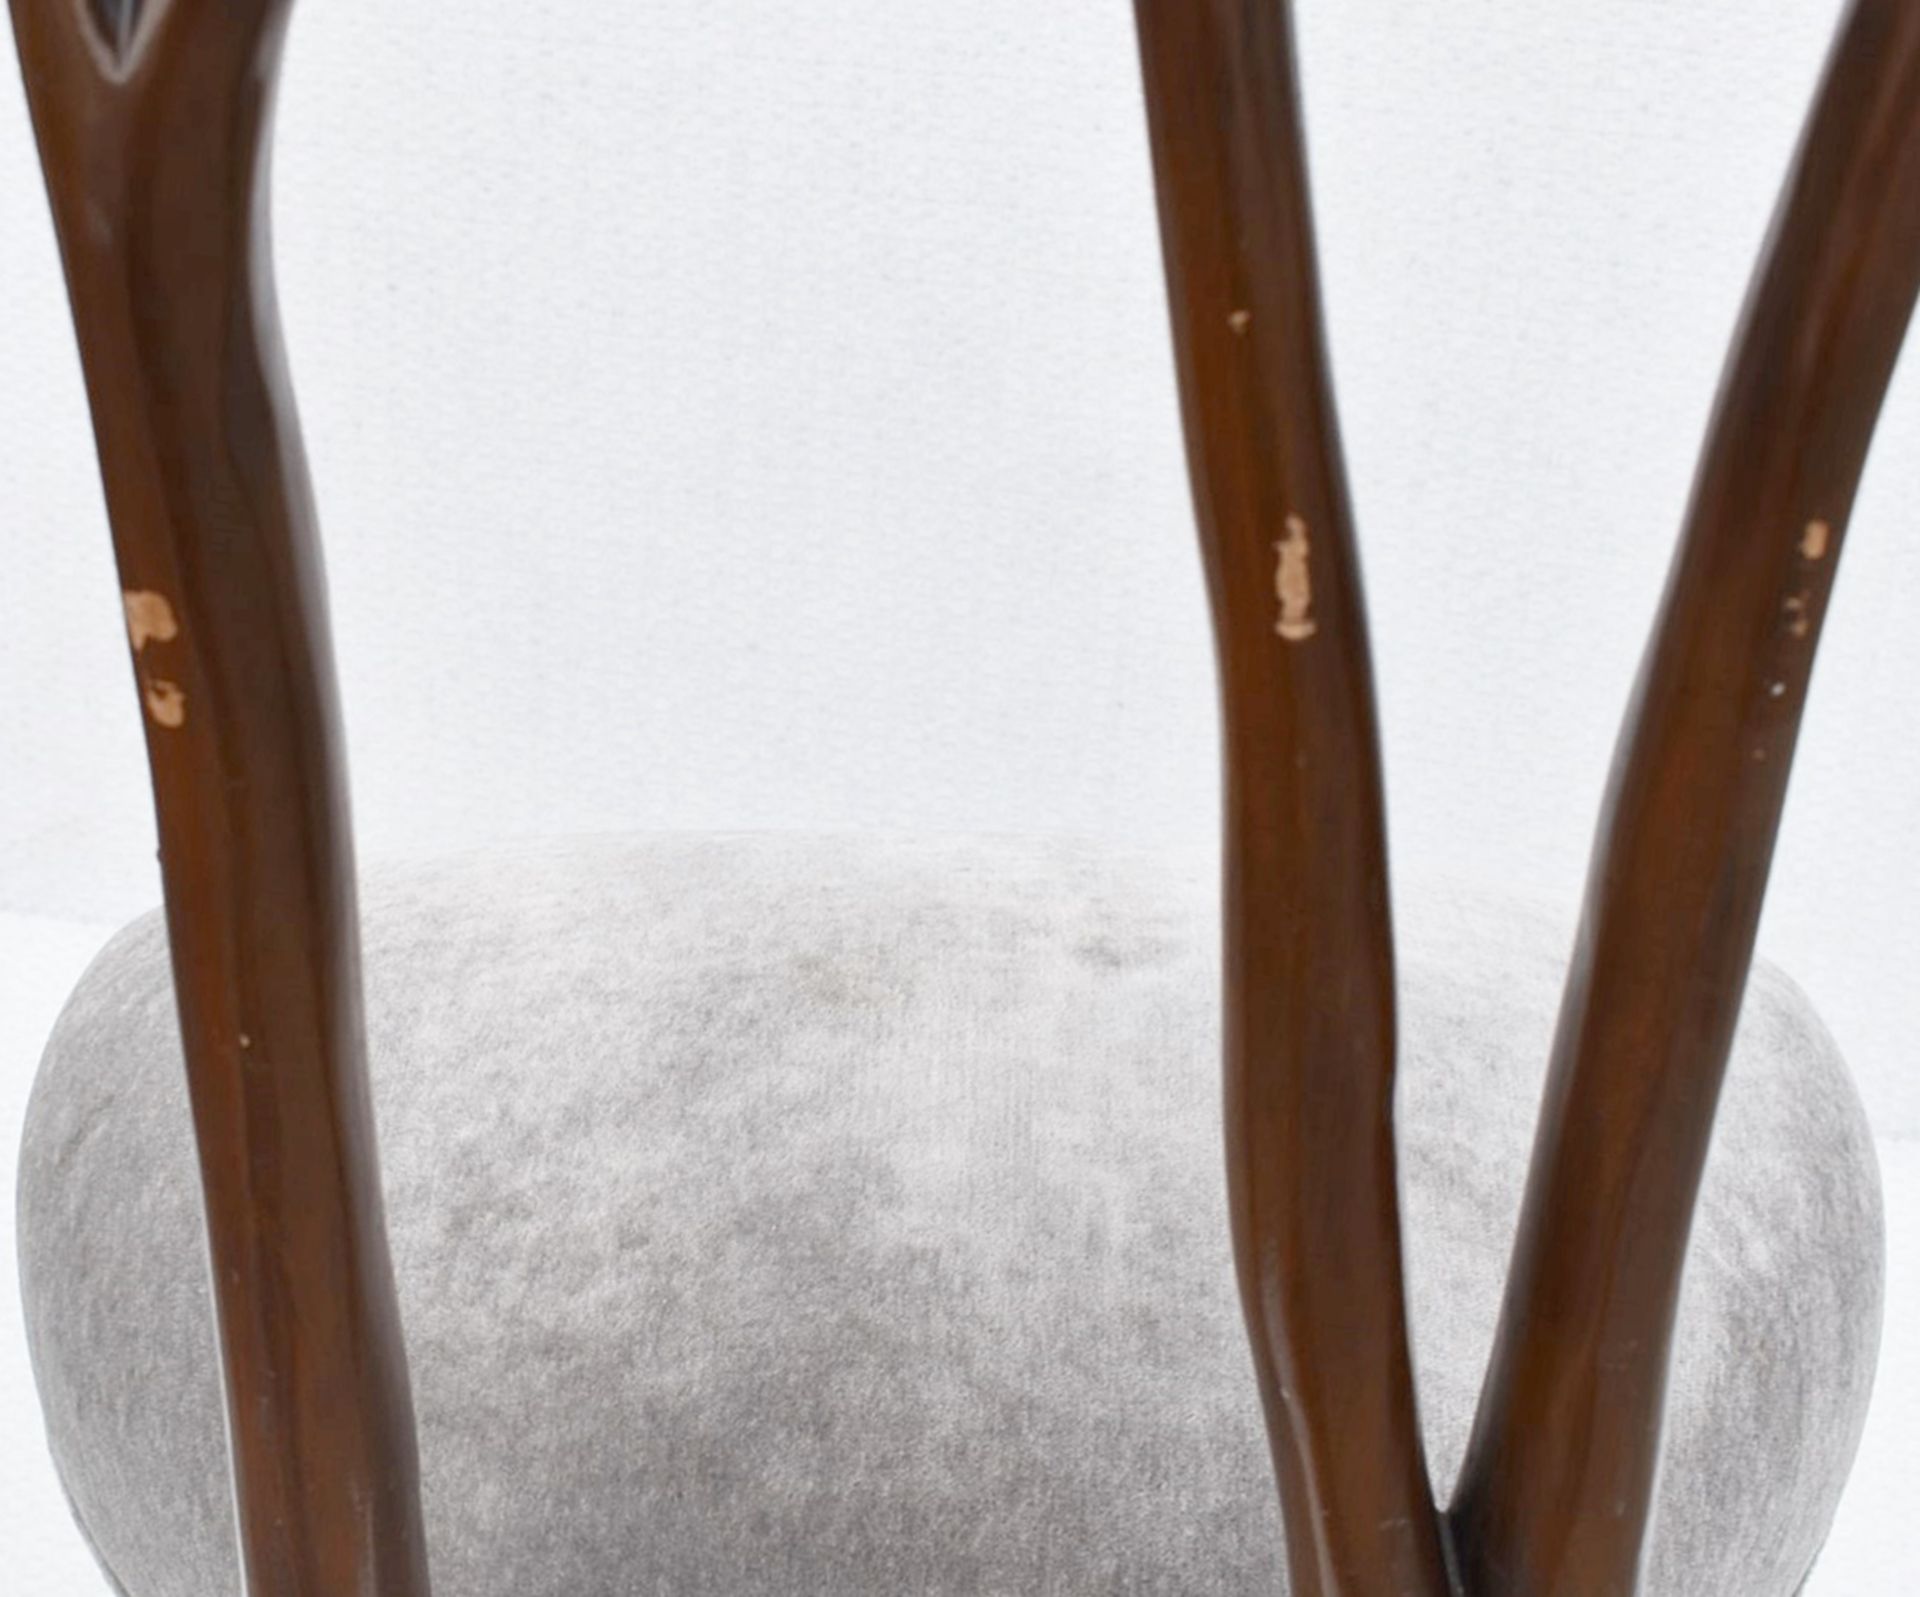 1 x CHRISTOPHER GUY 'Le Jardin' Luxury Hand-carved Solid Mahogany Designer Dining Chair - Recently - Image 8 of 14